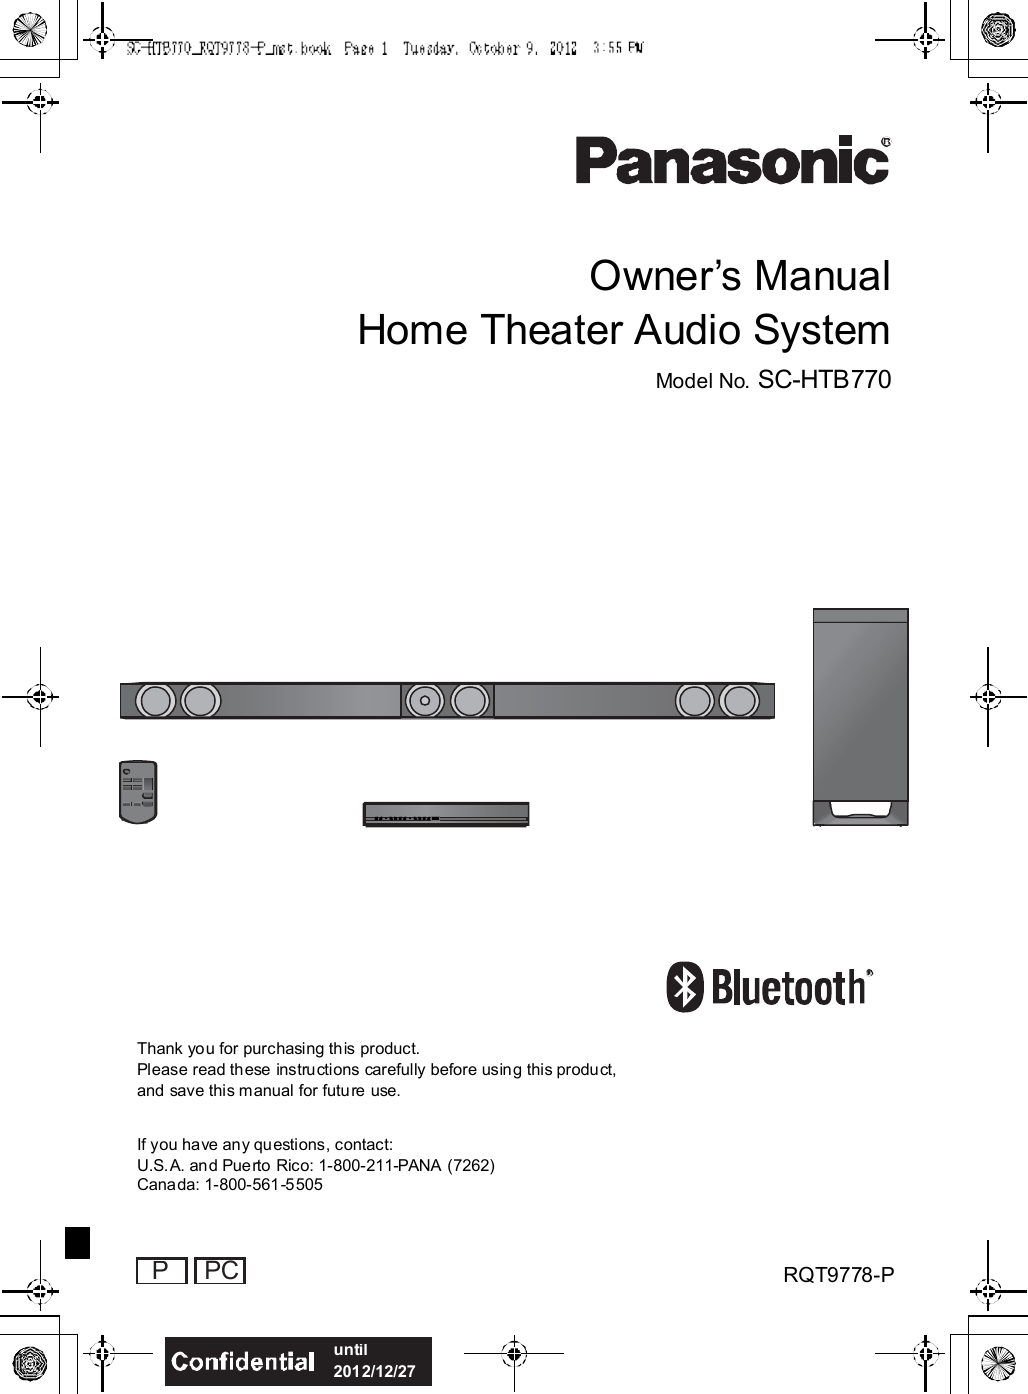 Owners ManualHome Theater Audio SystemModel No. SC-HTB770Thank you for purchasing this product.Please read these instructions carefully before using this product,and save this manual for future use.If you have any questions, contact:U.S.A. and Puerto Rico: 1-800-211-PANA (7262)Canada: 1-800-561-5505RQT9778-P